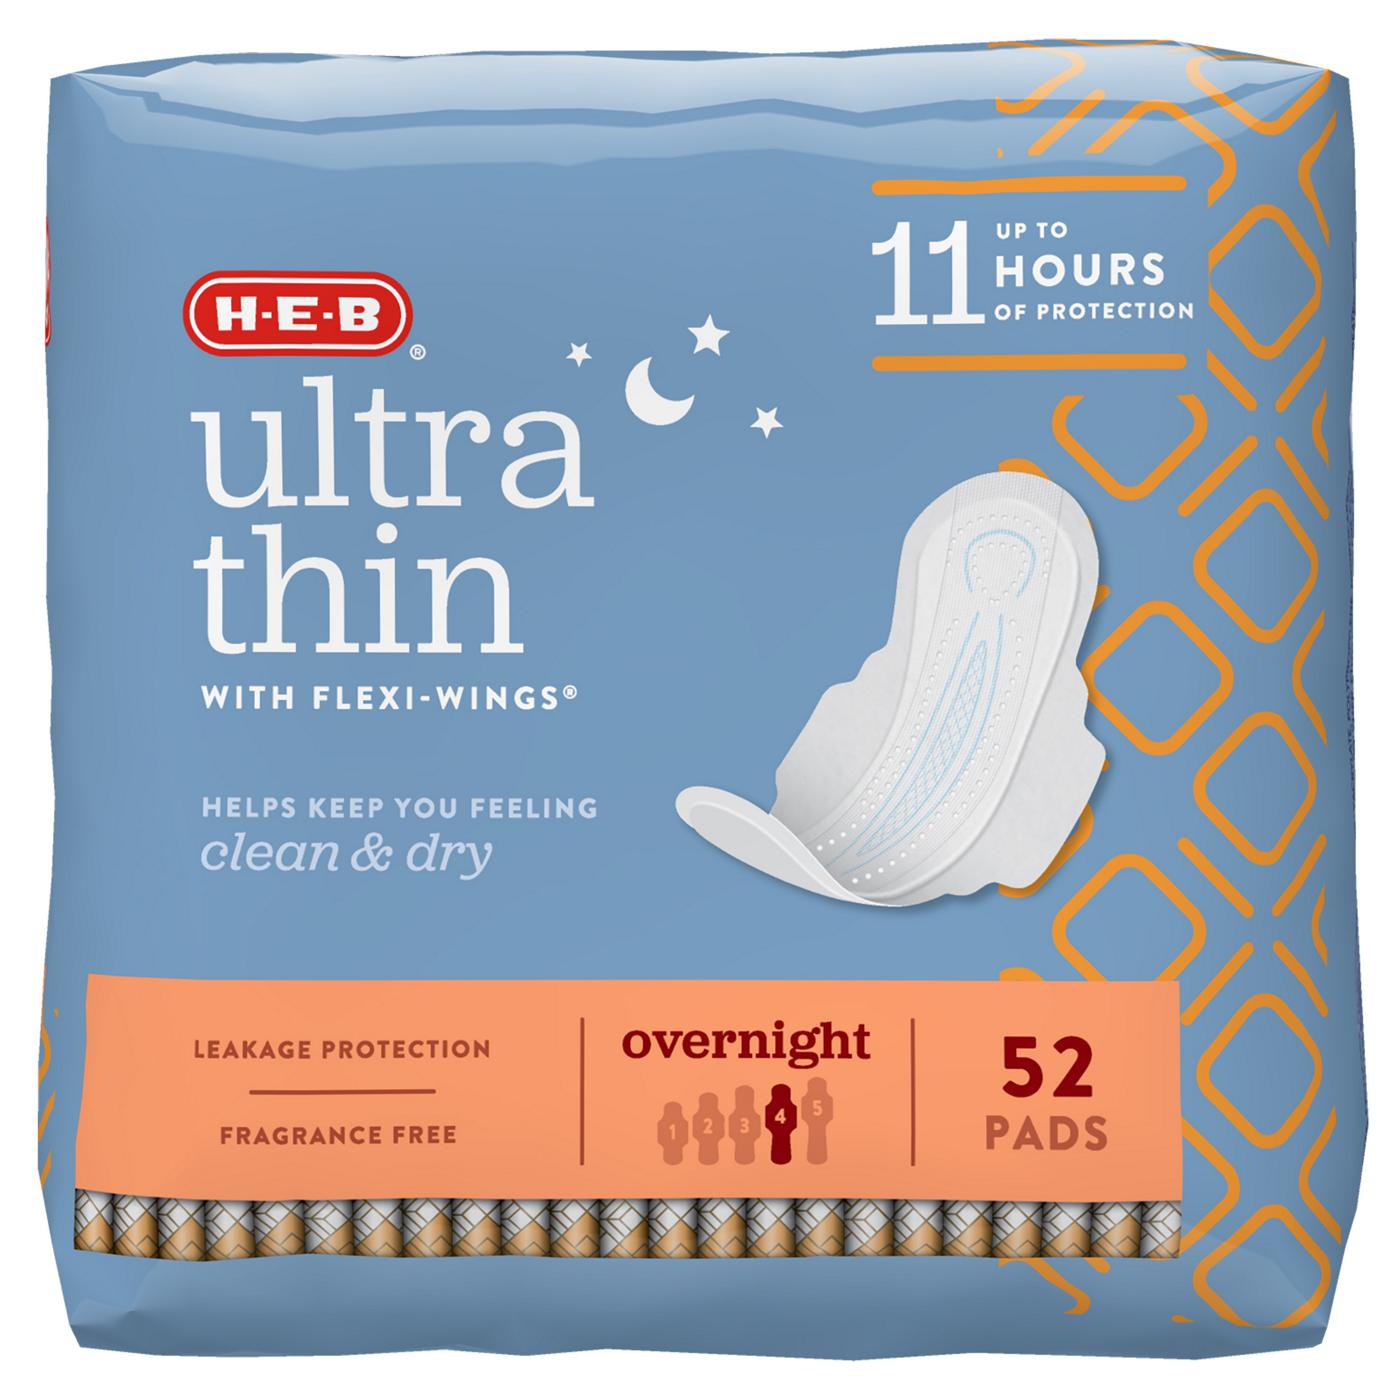 H-E-B Ultra Thin with Flexi-Wings Overnight Pads; image 1 of 6